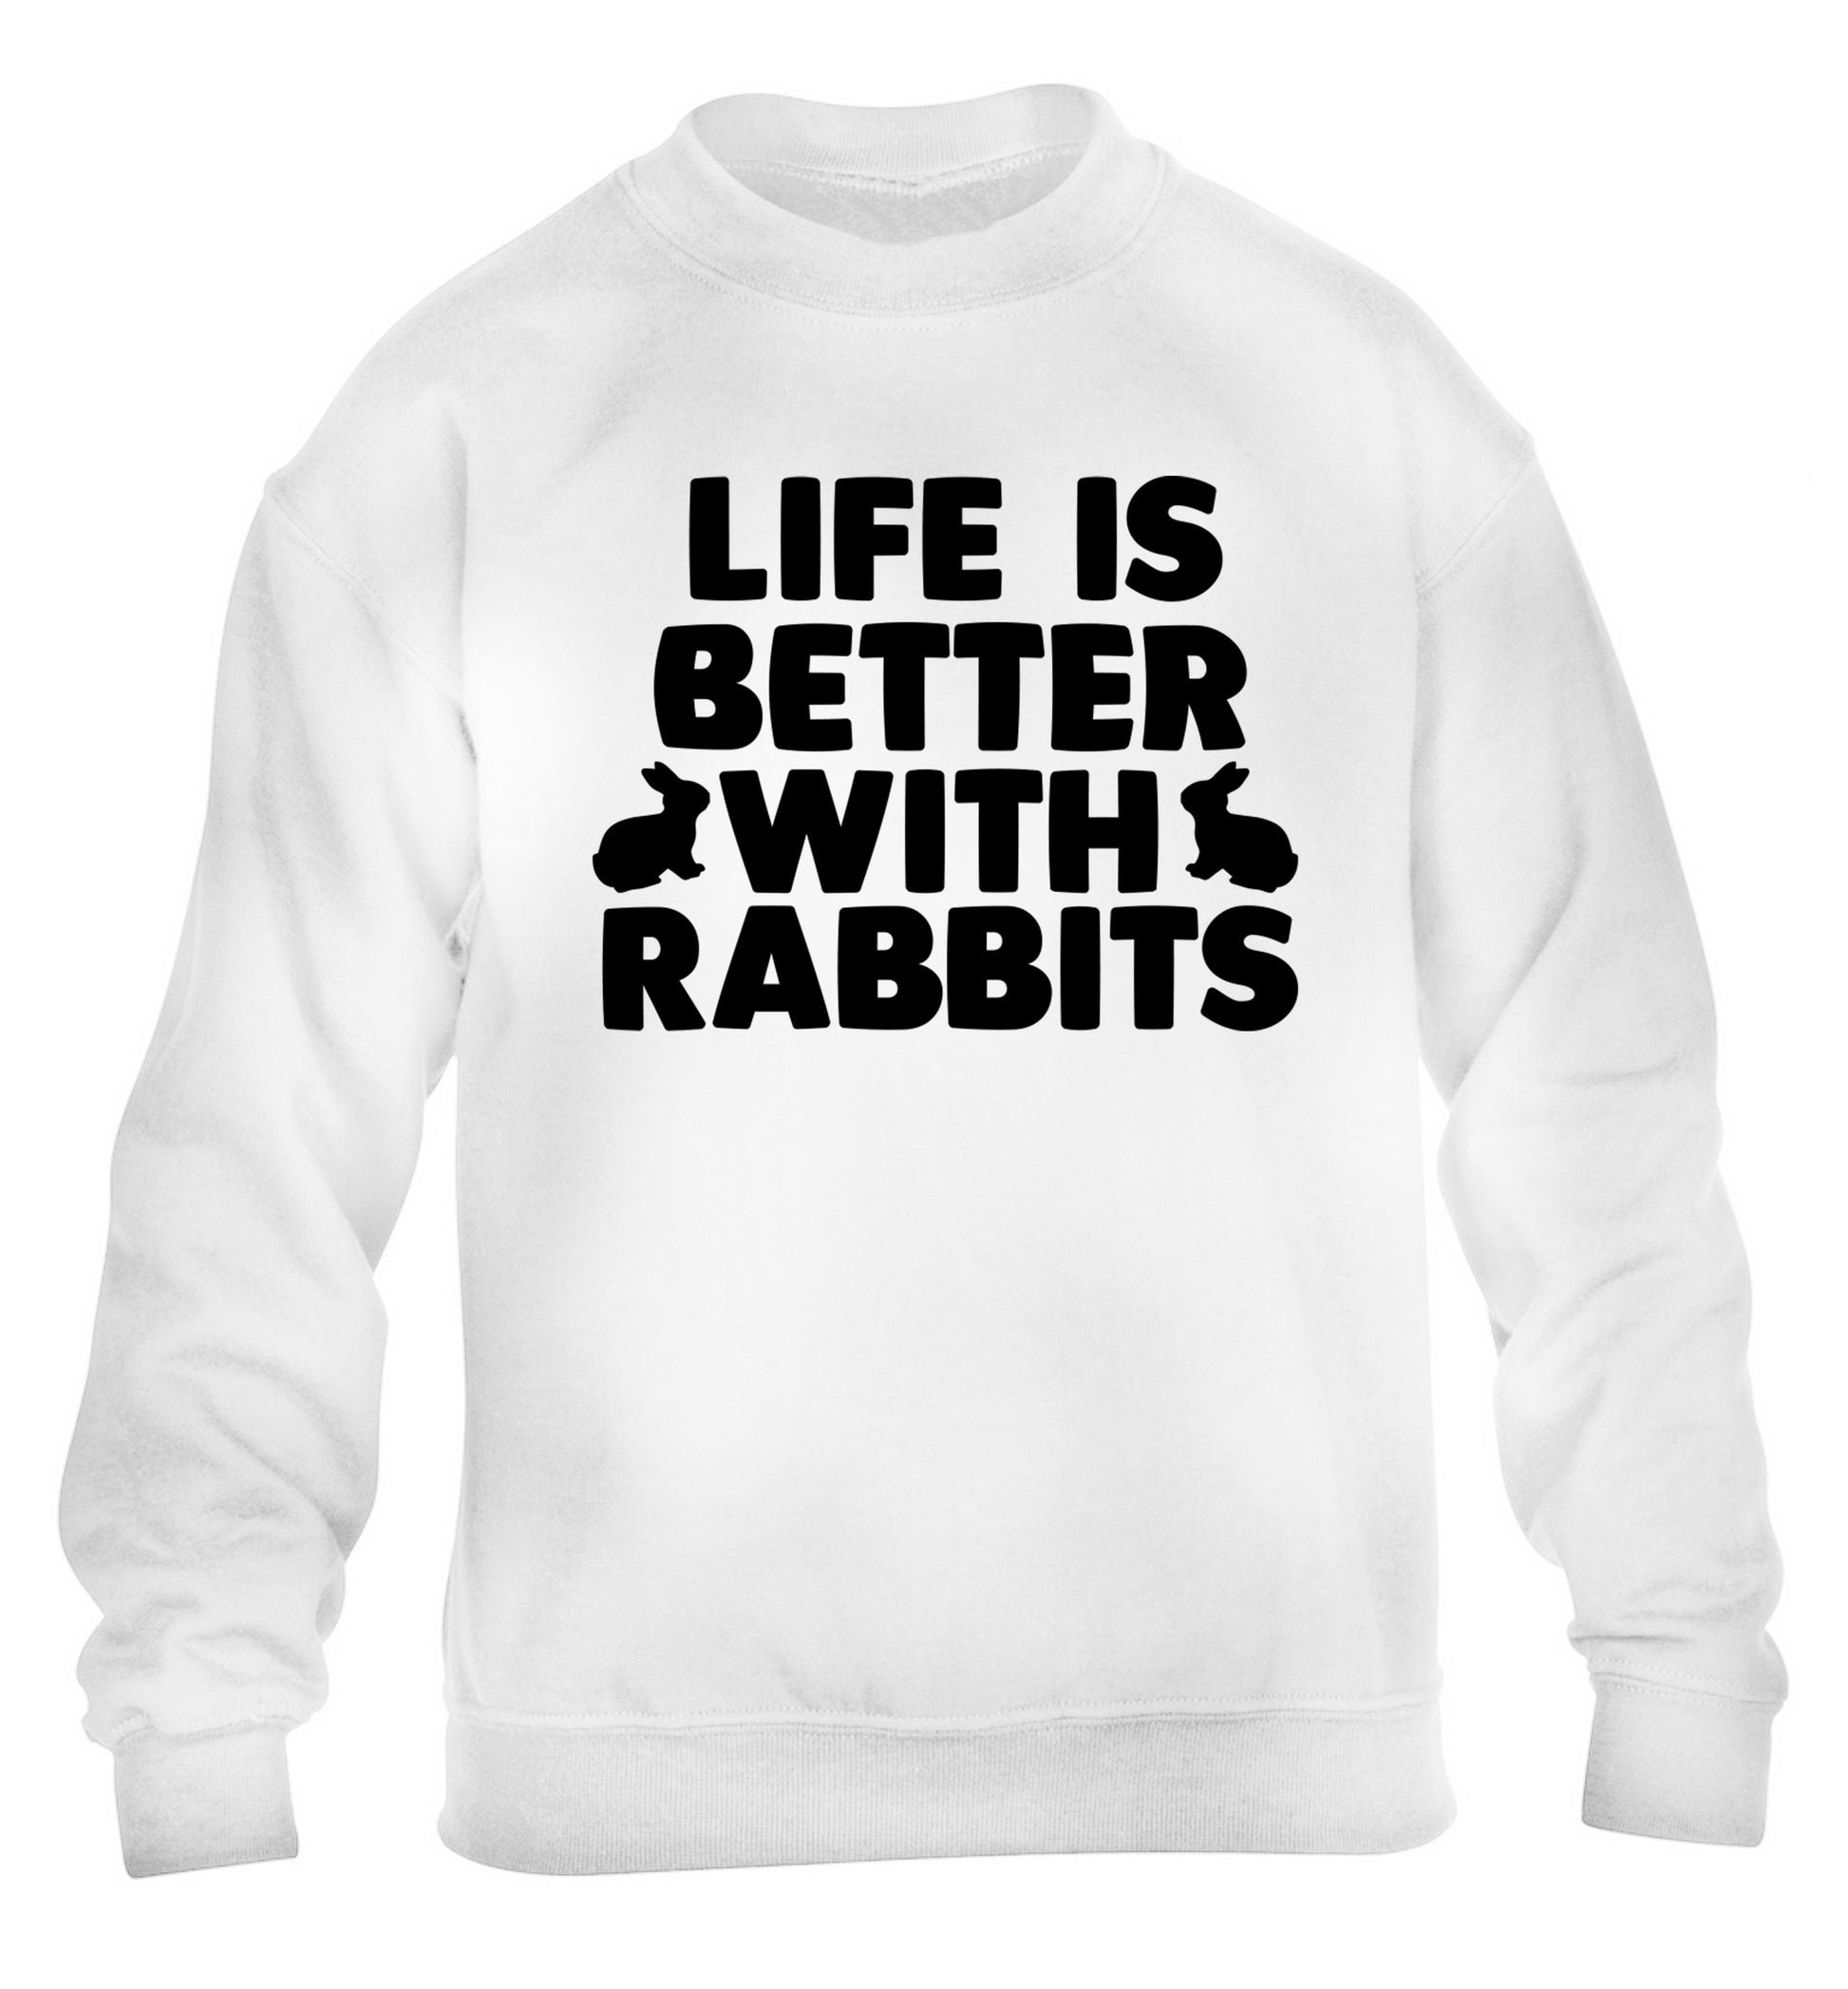 Life is better with rabbits children's white  sweater 12-14 Years